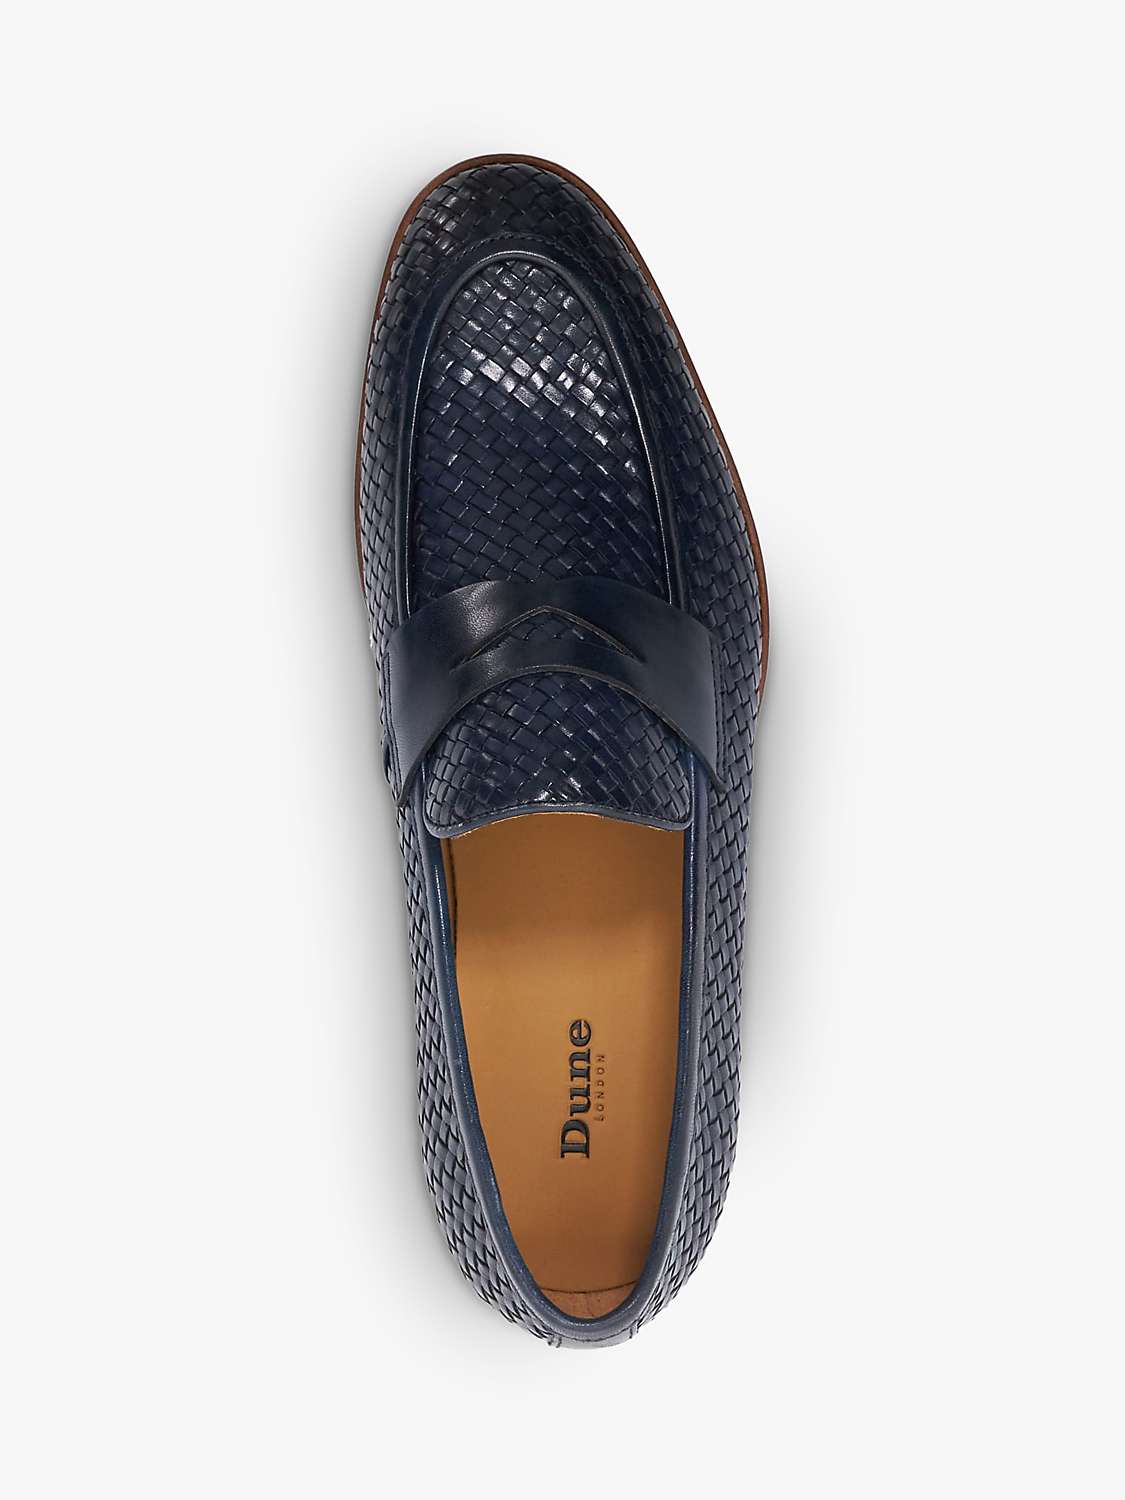 Buy Dune Saharas Leather Penny Loafers Online at johnlewis.com